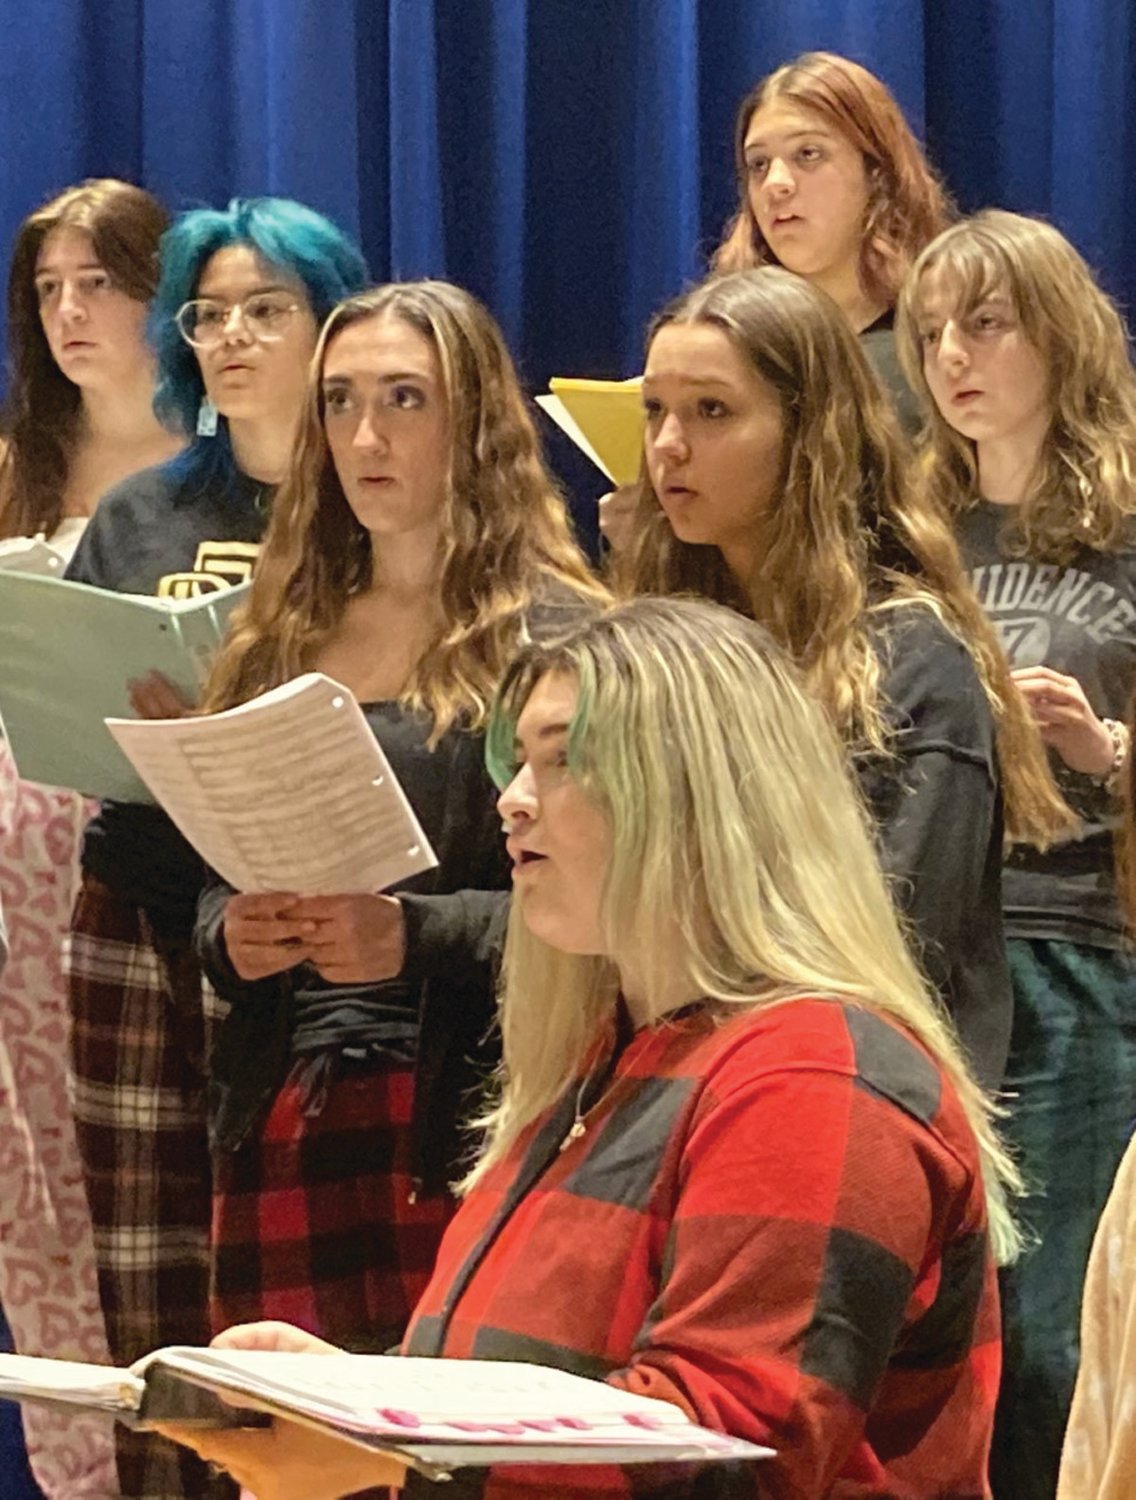 TALENTED TROUPE: JHS undergrads Sofia Rose, Neriah Nhar-Matko, Juliana Pires, Destinee Costa, Madison DeCosta, Chantel DeJesus and Shyla Soto will be singing various selections during the annual Winter Concert next Wednesday night.